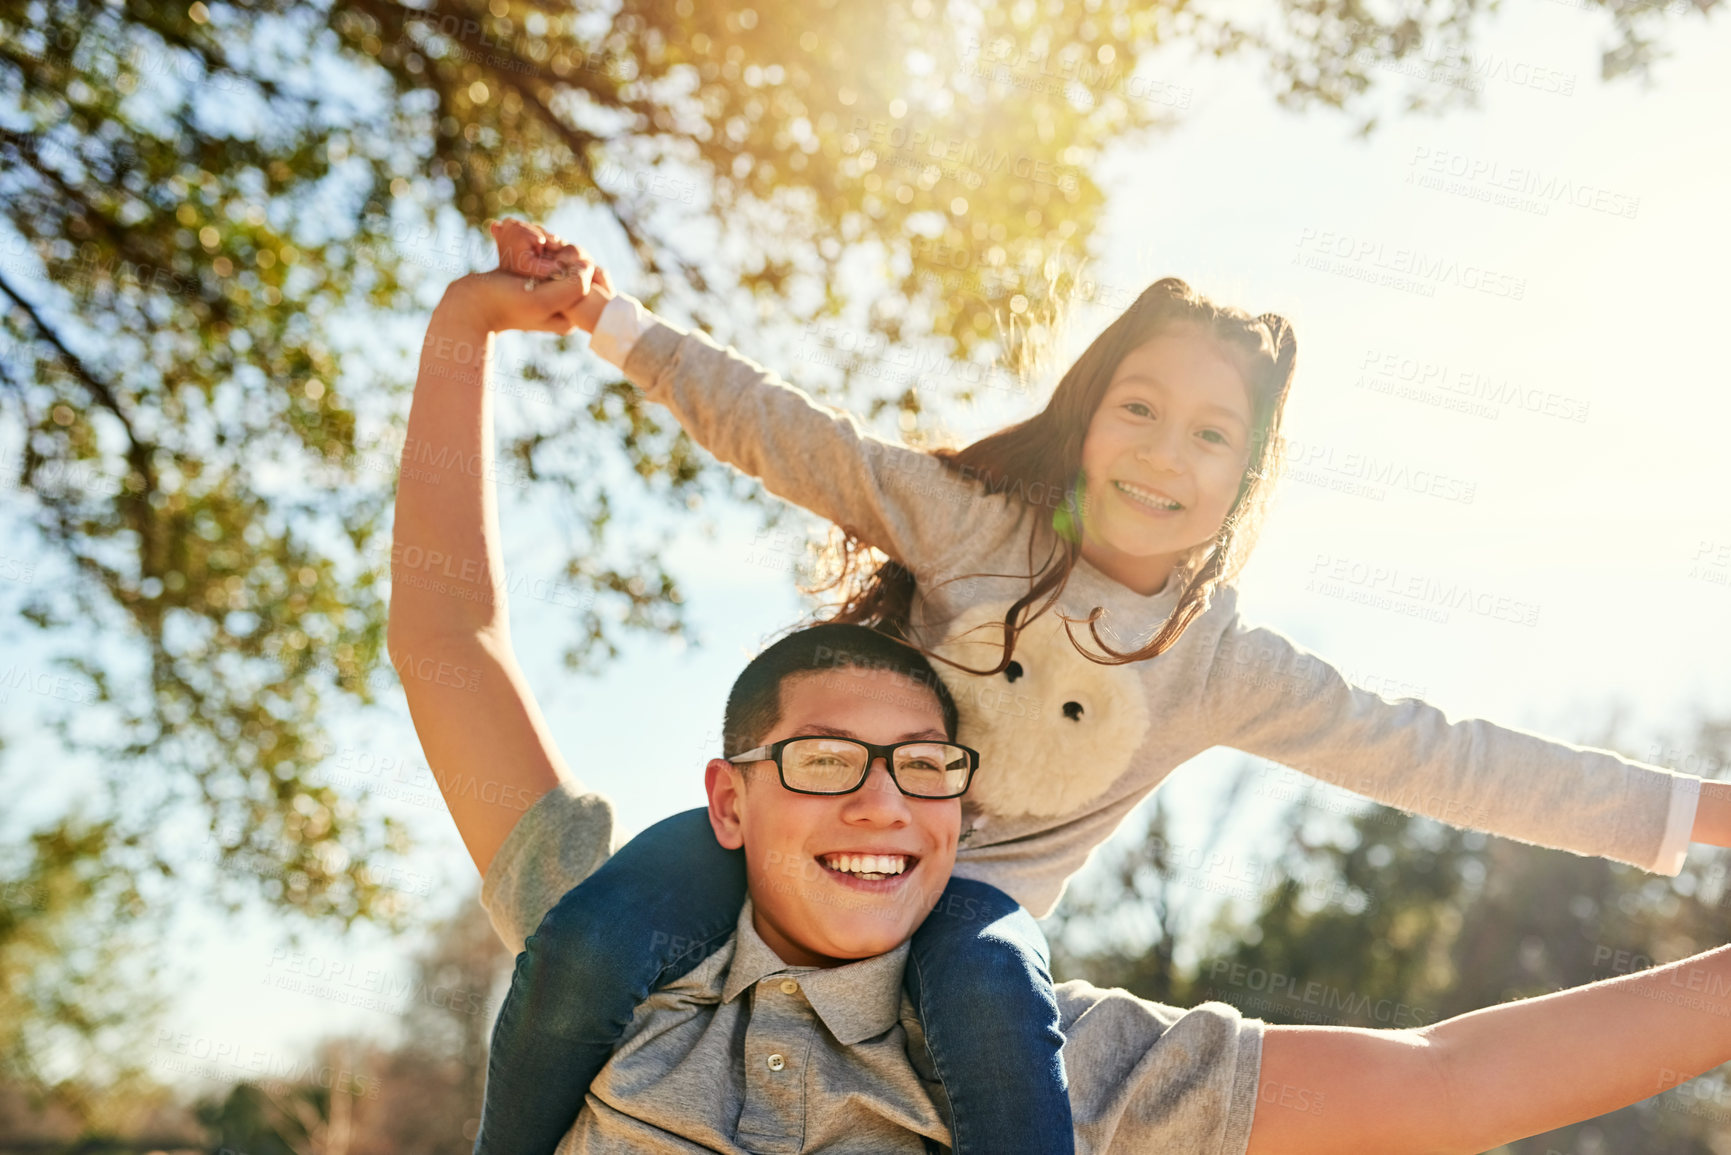 Buy stock photo Low angle shot of a teenage boy carrying his adorable little sister on his shoulders outdoors